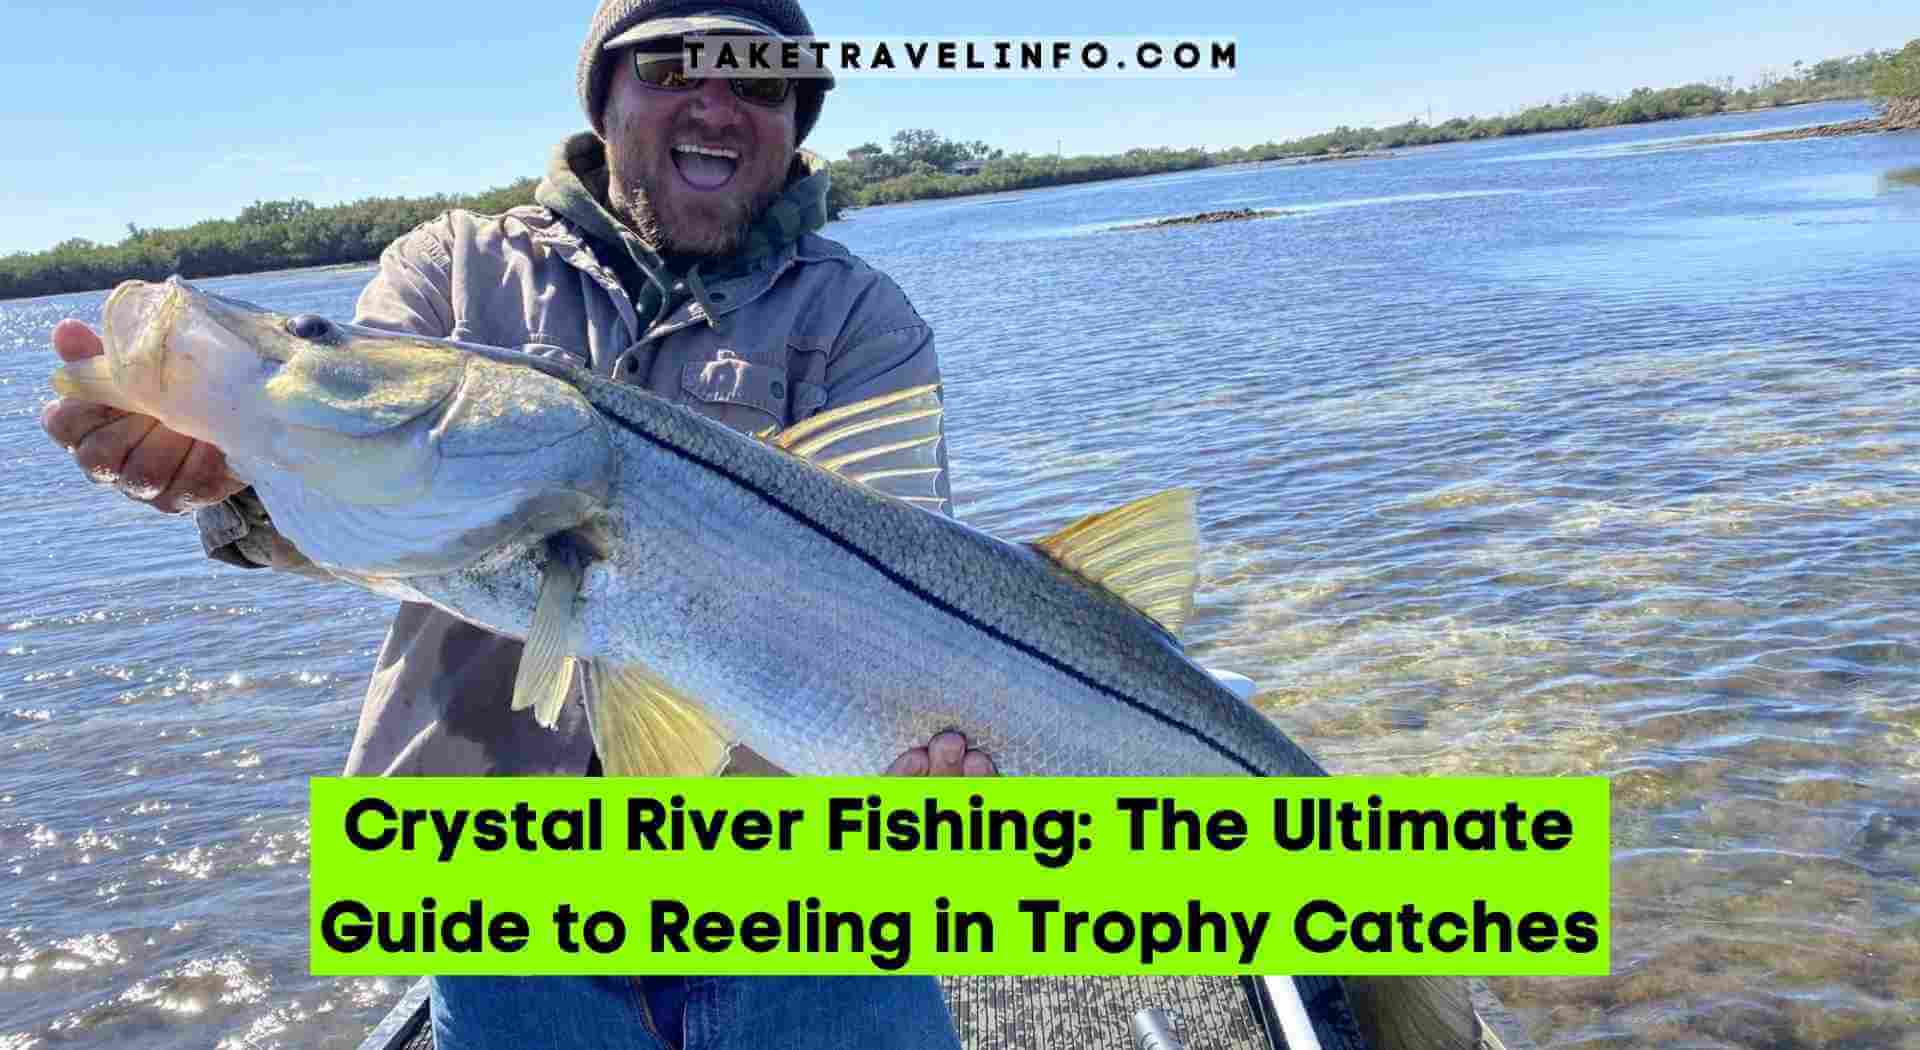 Crystal River Fishing: The Ultimate Guide to Reeling in Trophy Catches